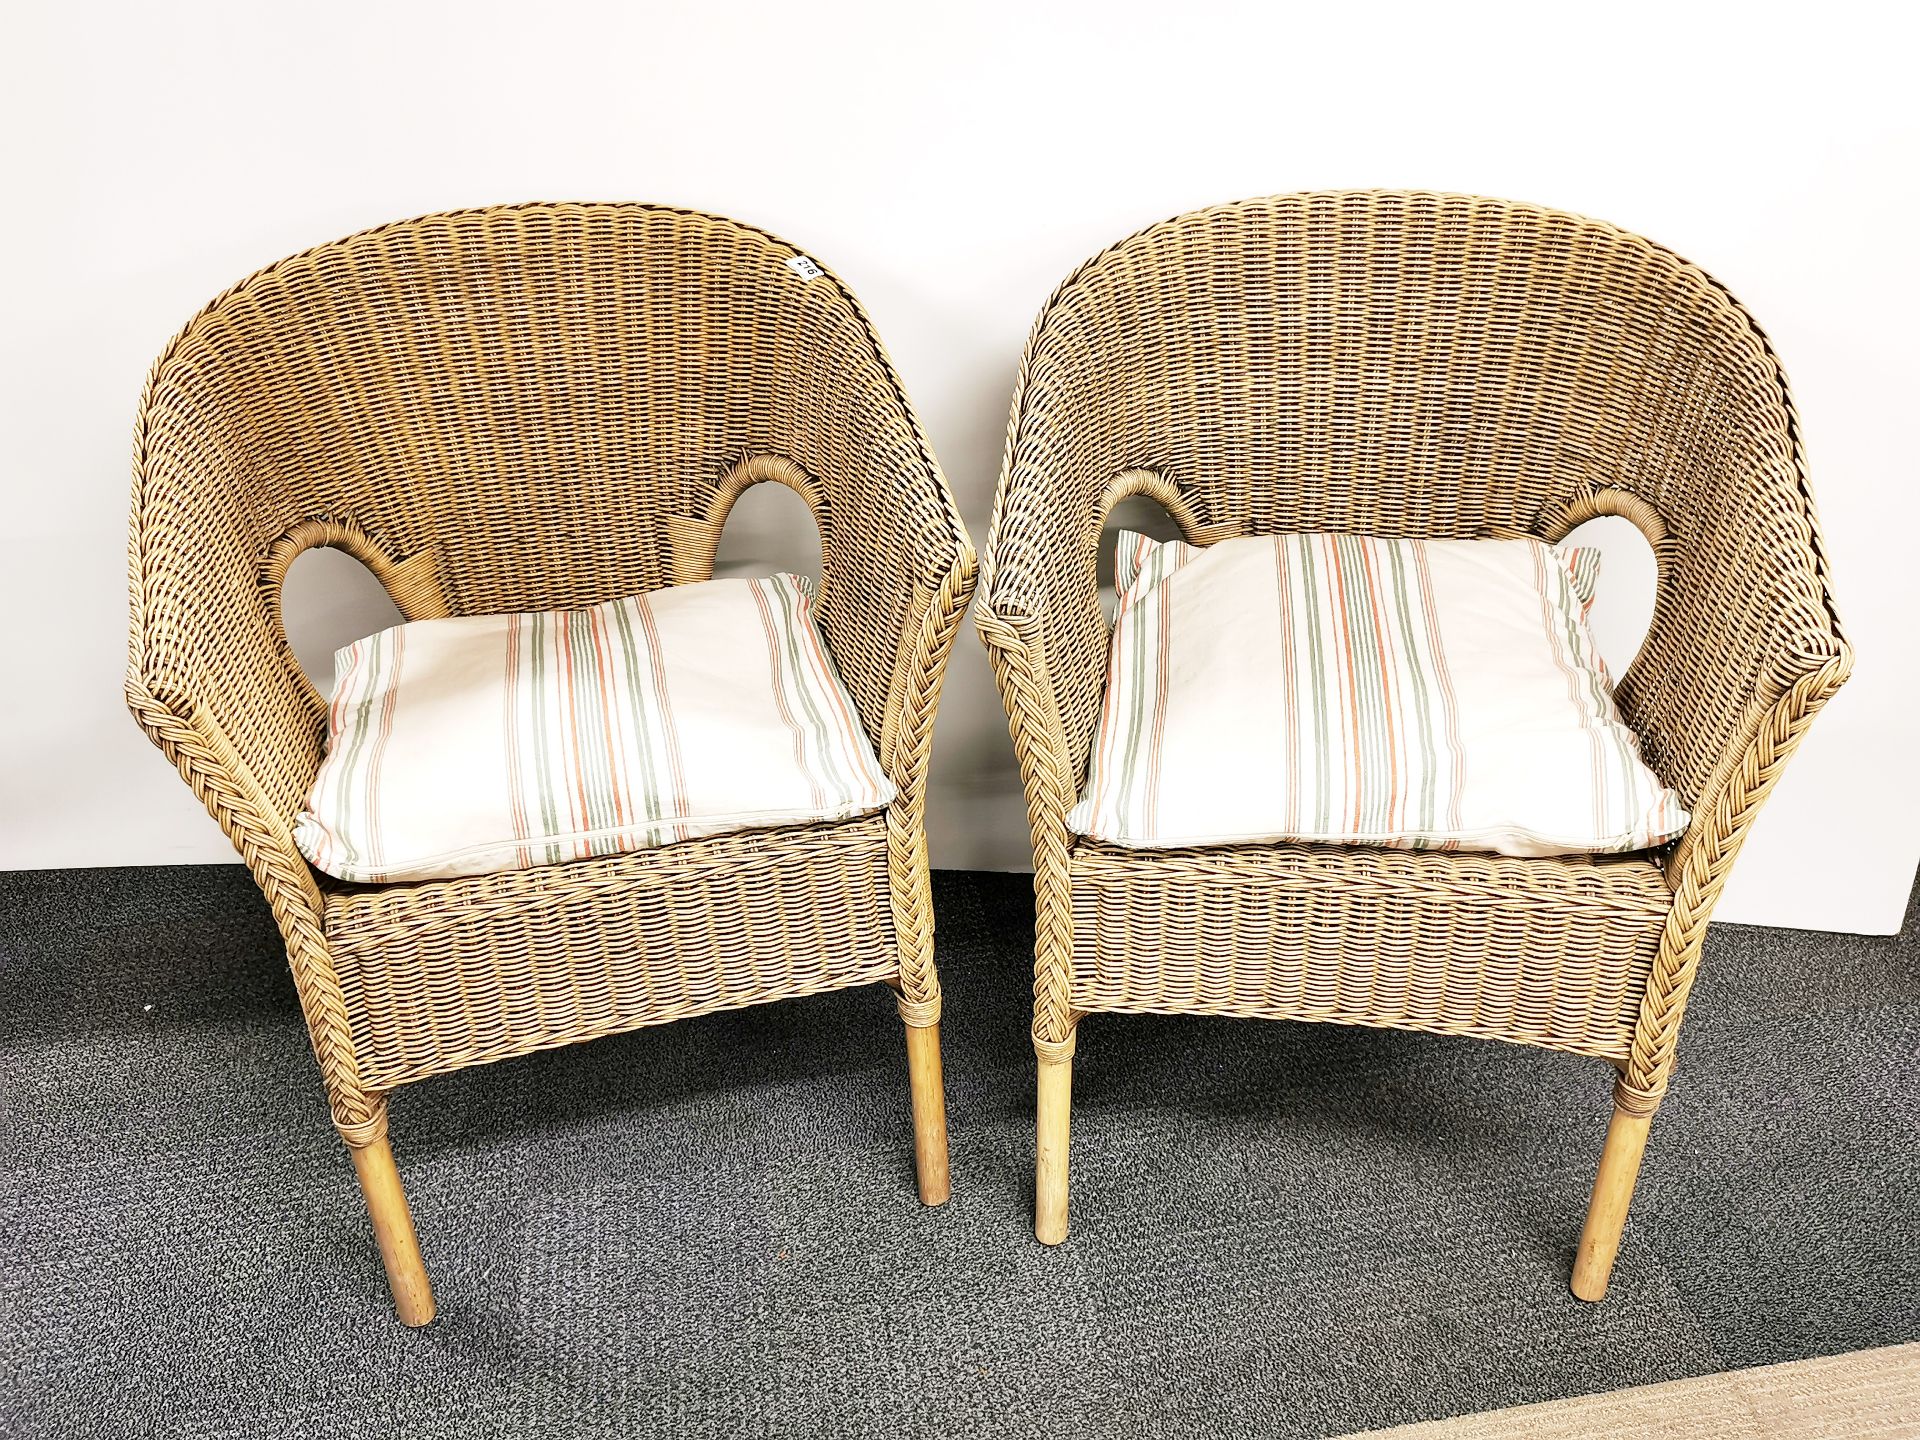 Three vintage wicker and cane armchairs. - Image 2 of 2